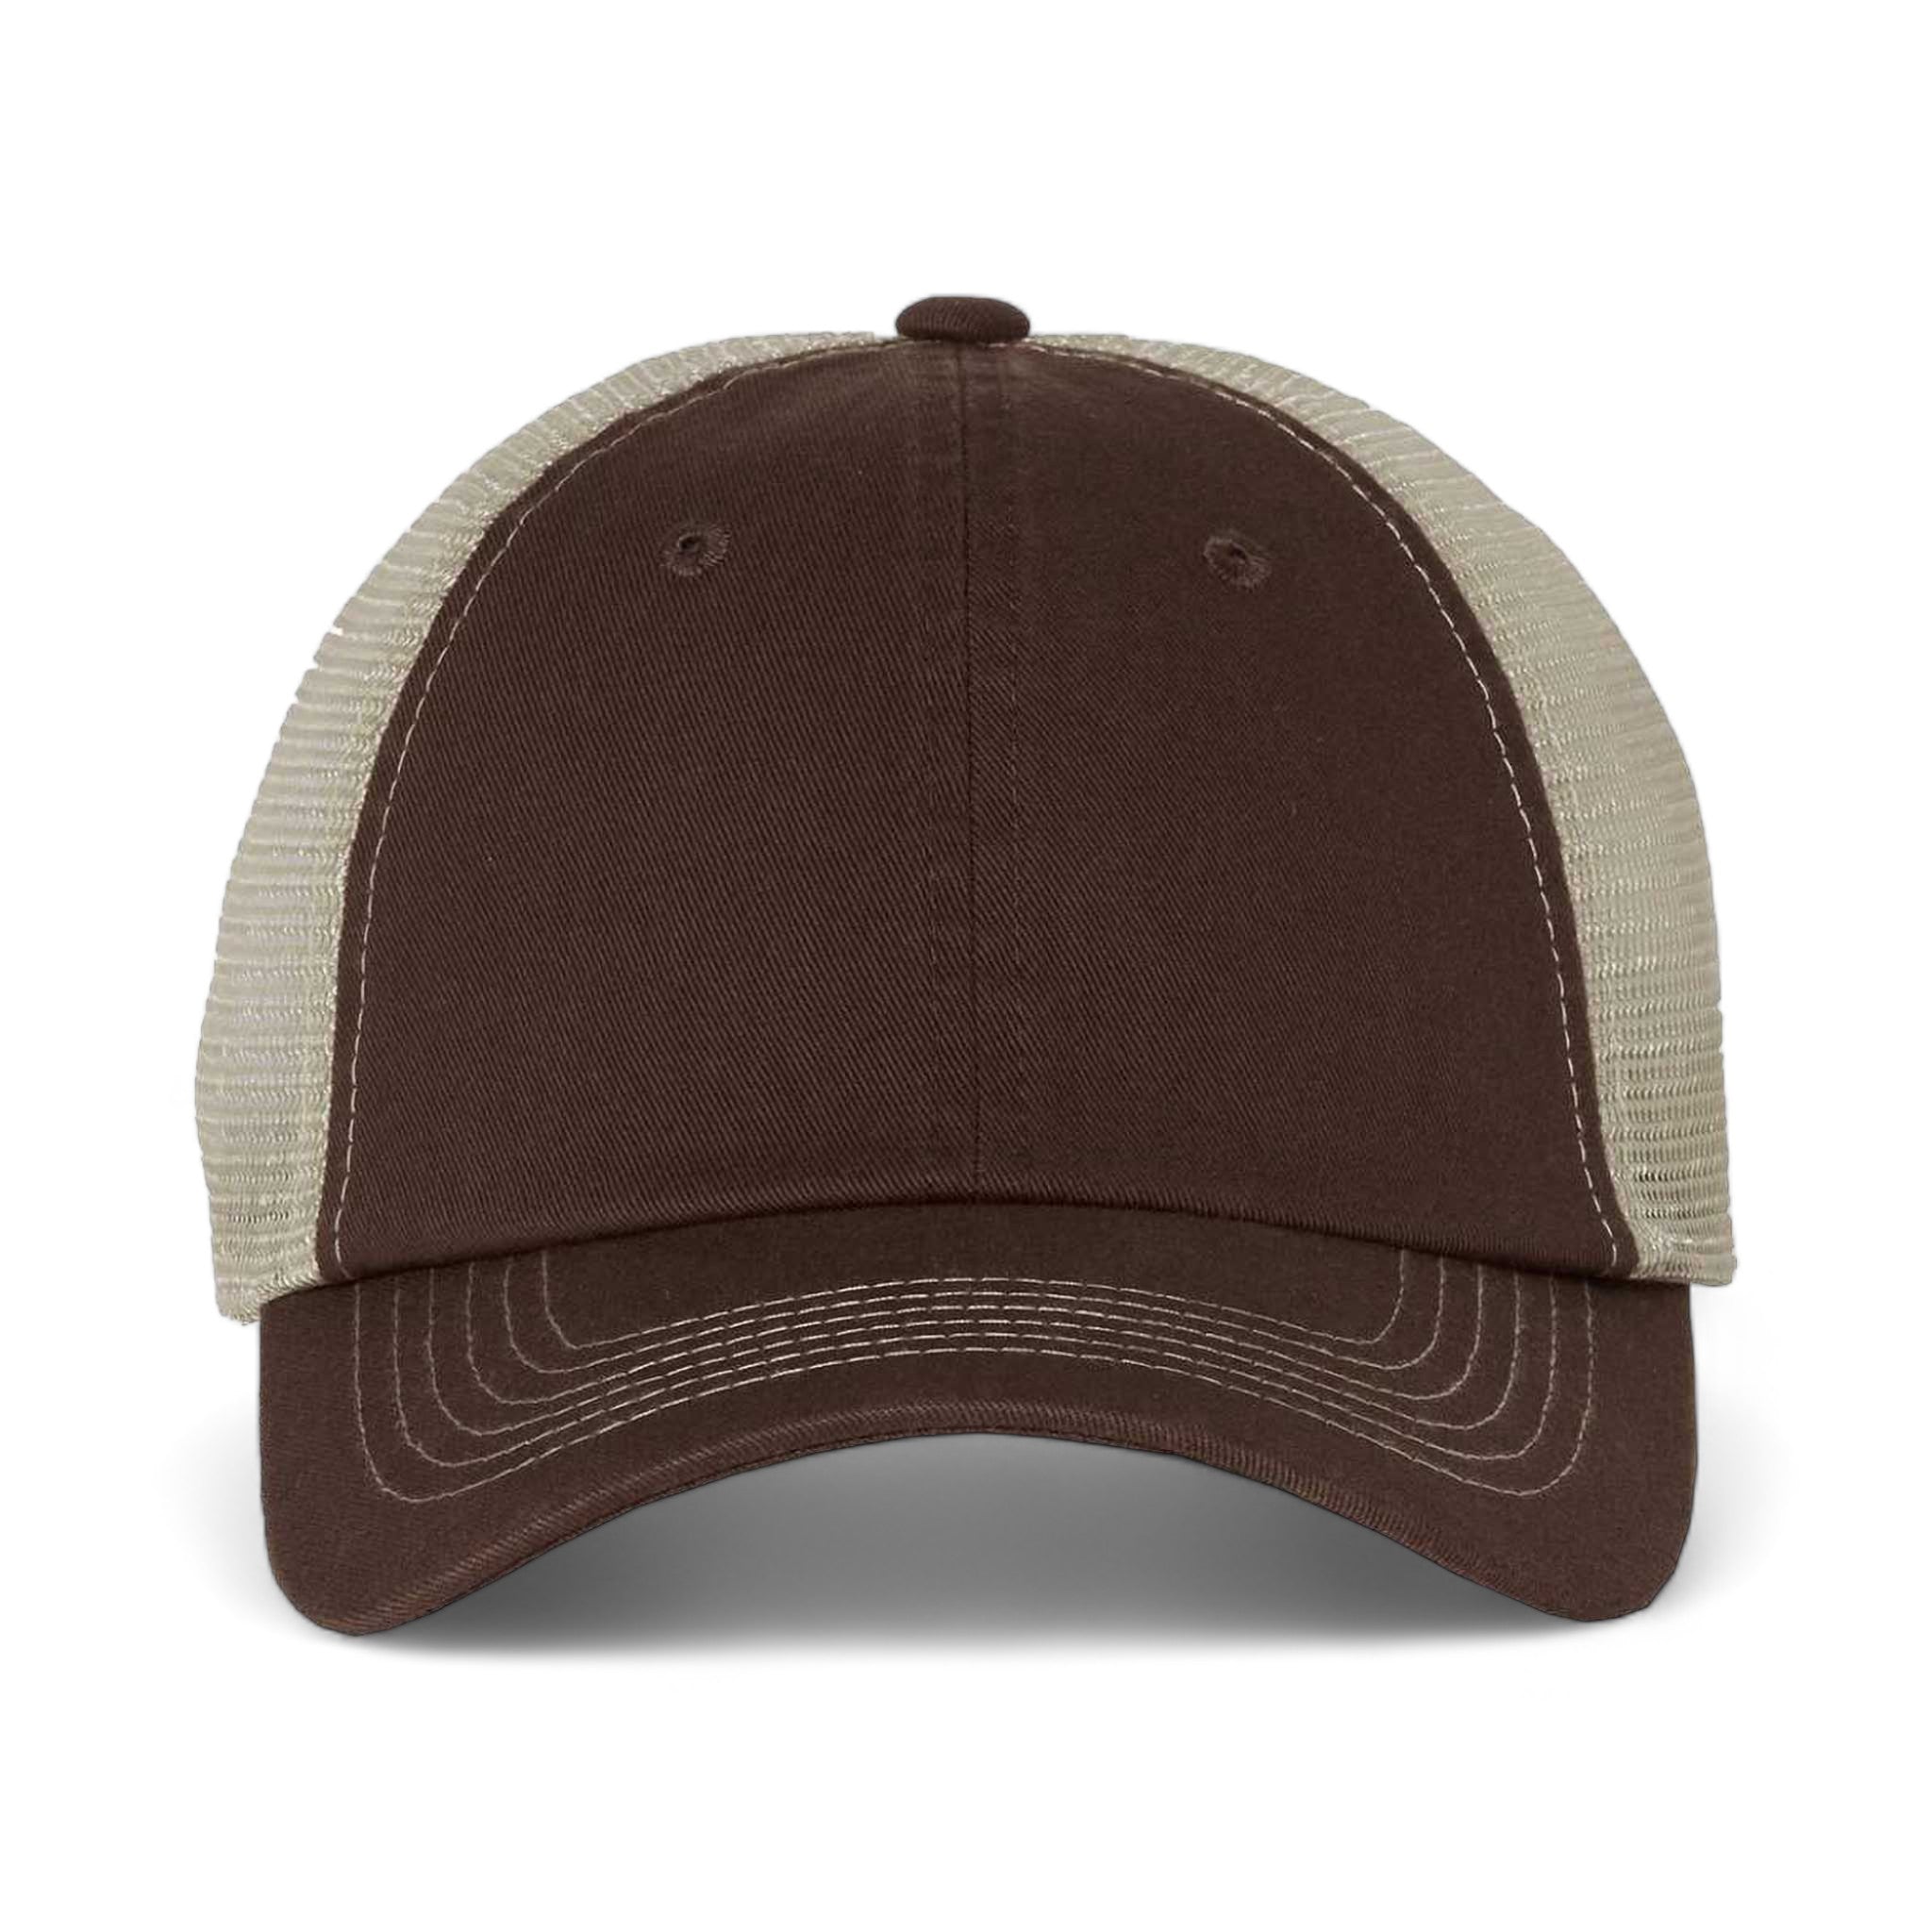 Front view of Sportsman 3100 custom hat in brown and stone